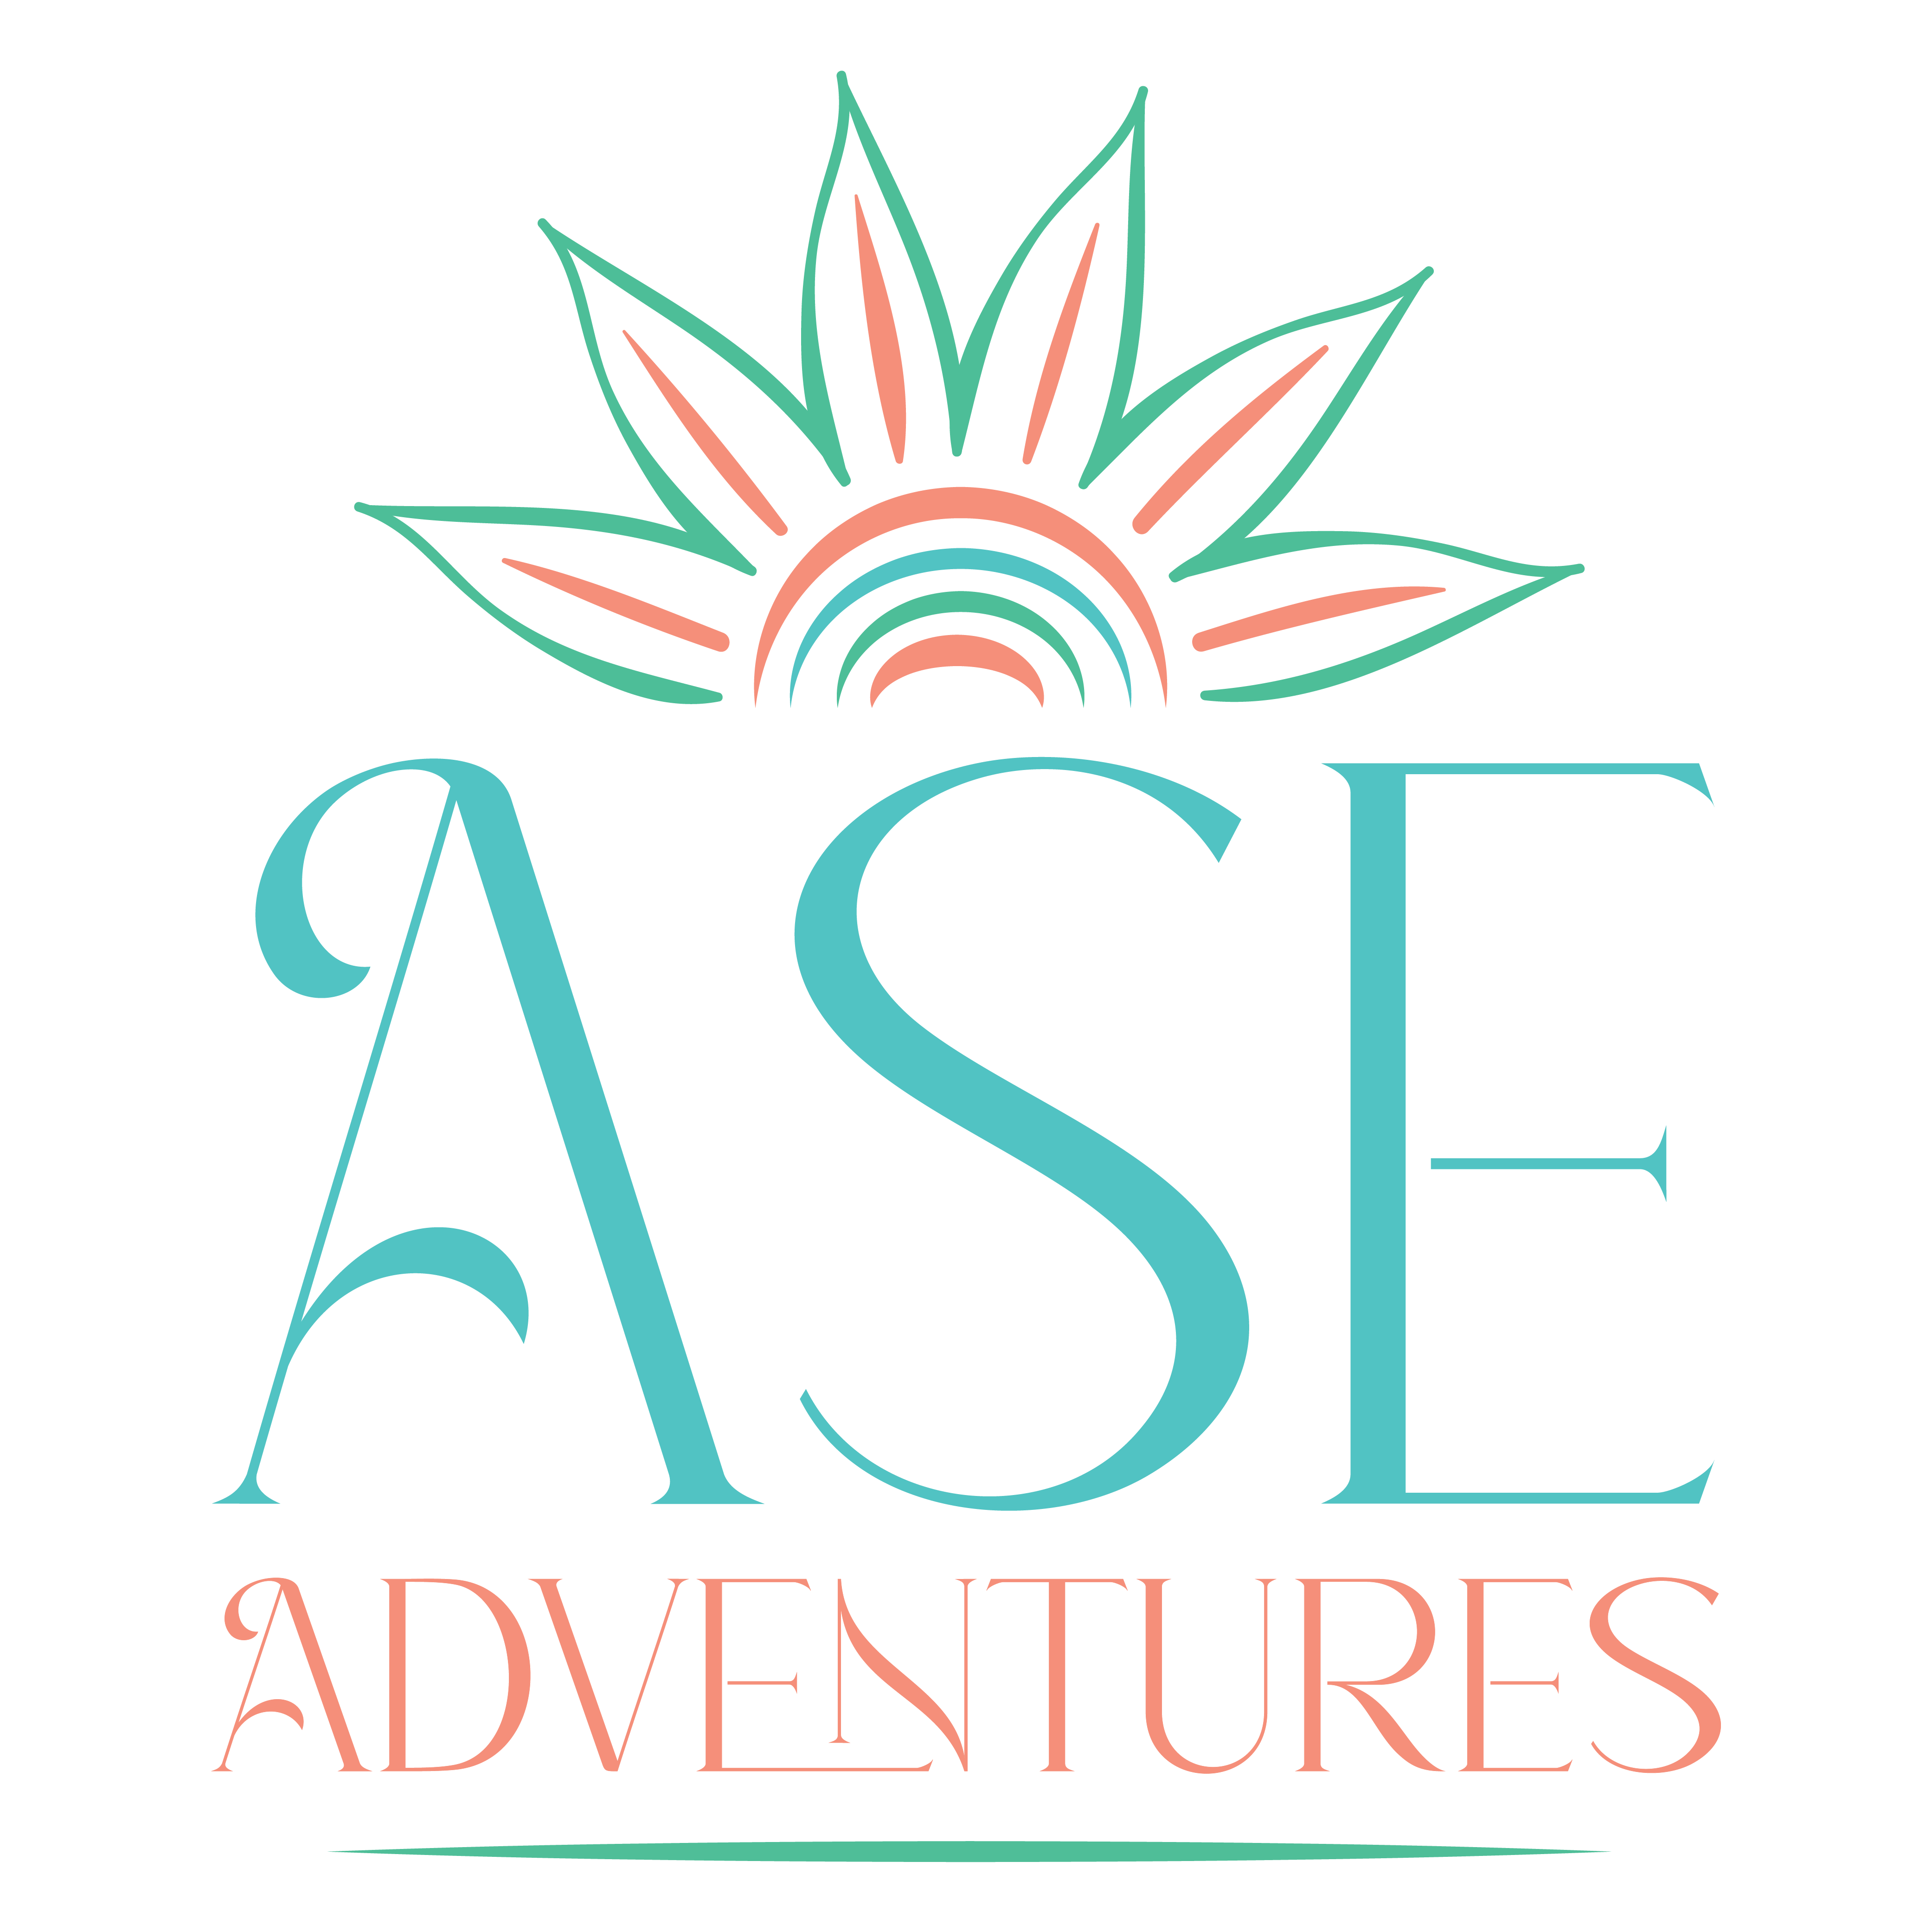 Ase Adventures | Luxury Travel Made Attainable